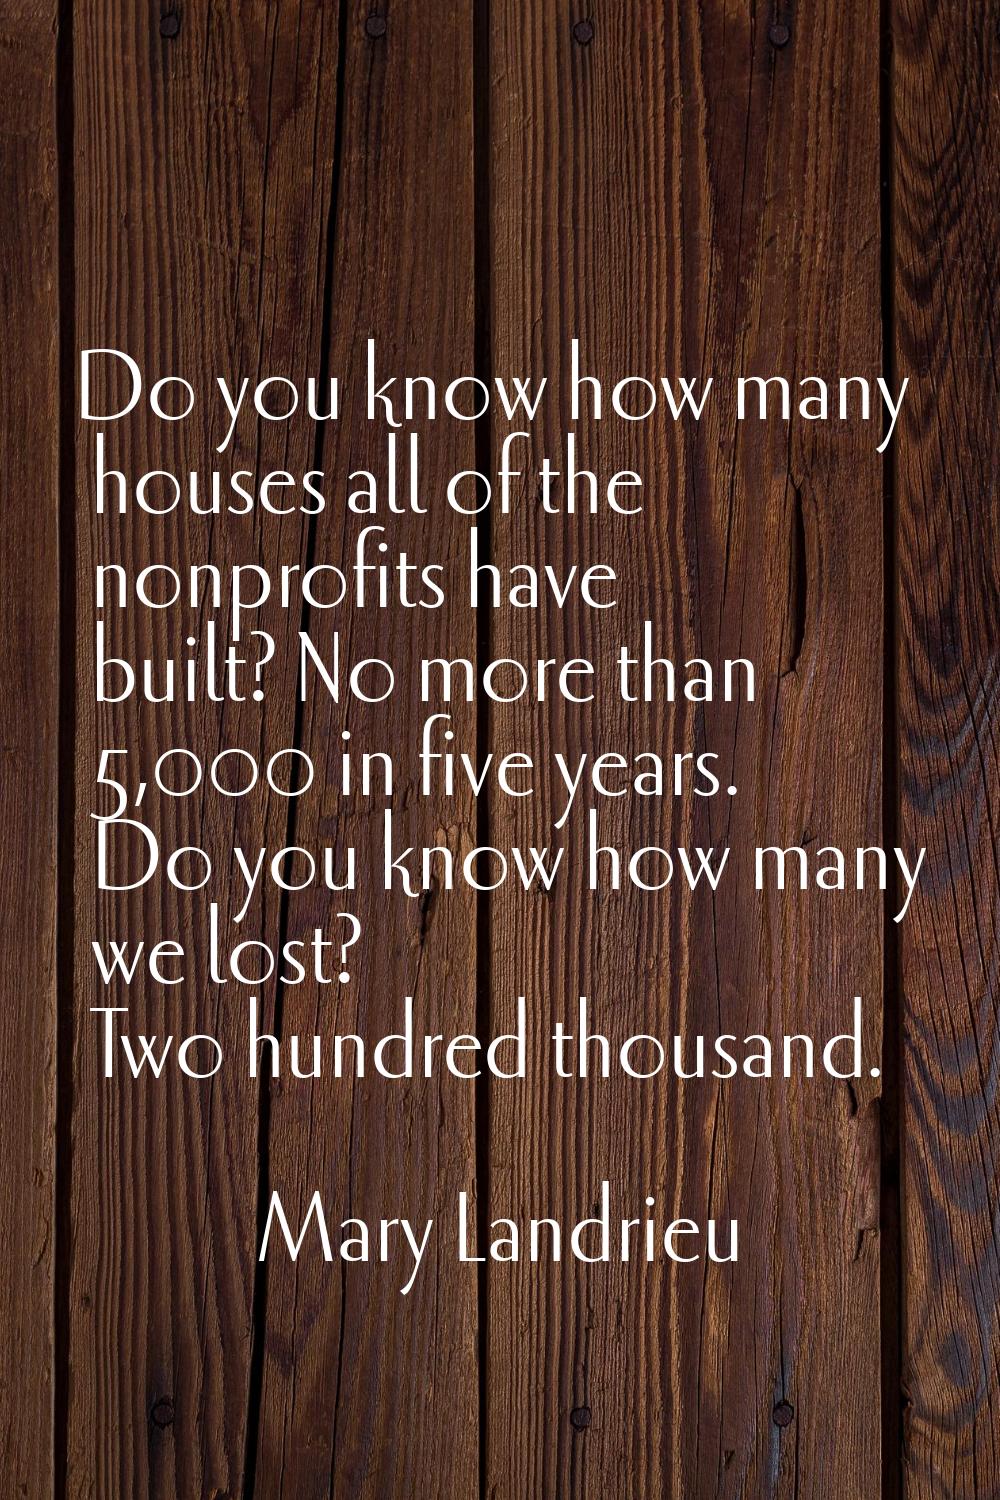 Do you know how many houses all of the nonprofits have built? No more than 5,000 in five years. Do 